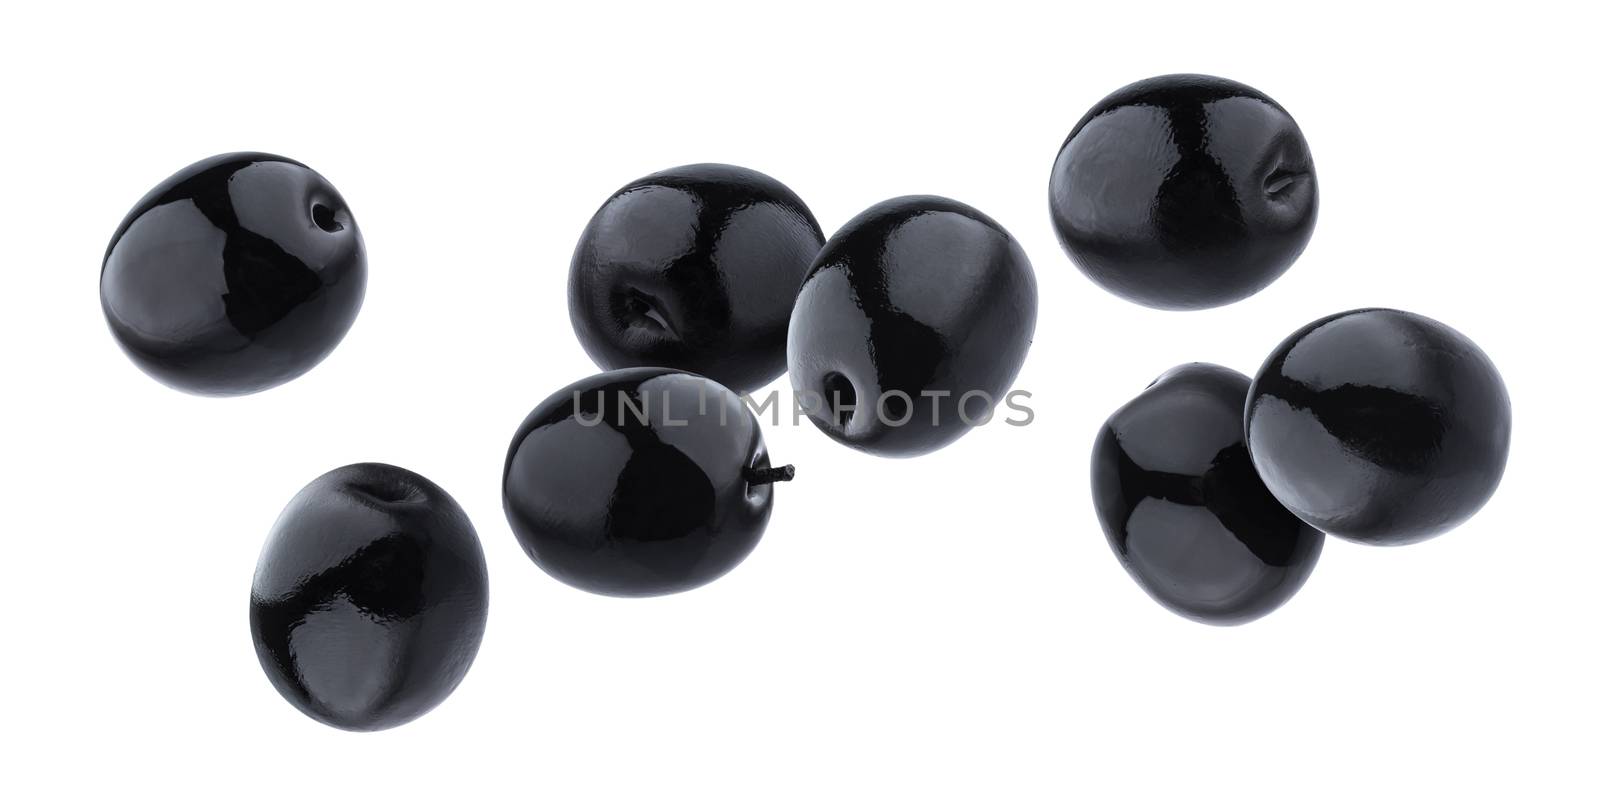 Black olives isolated on white background with clipping path, close-up